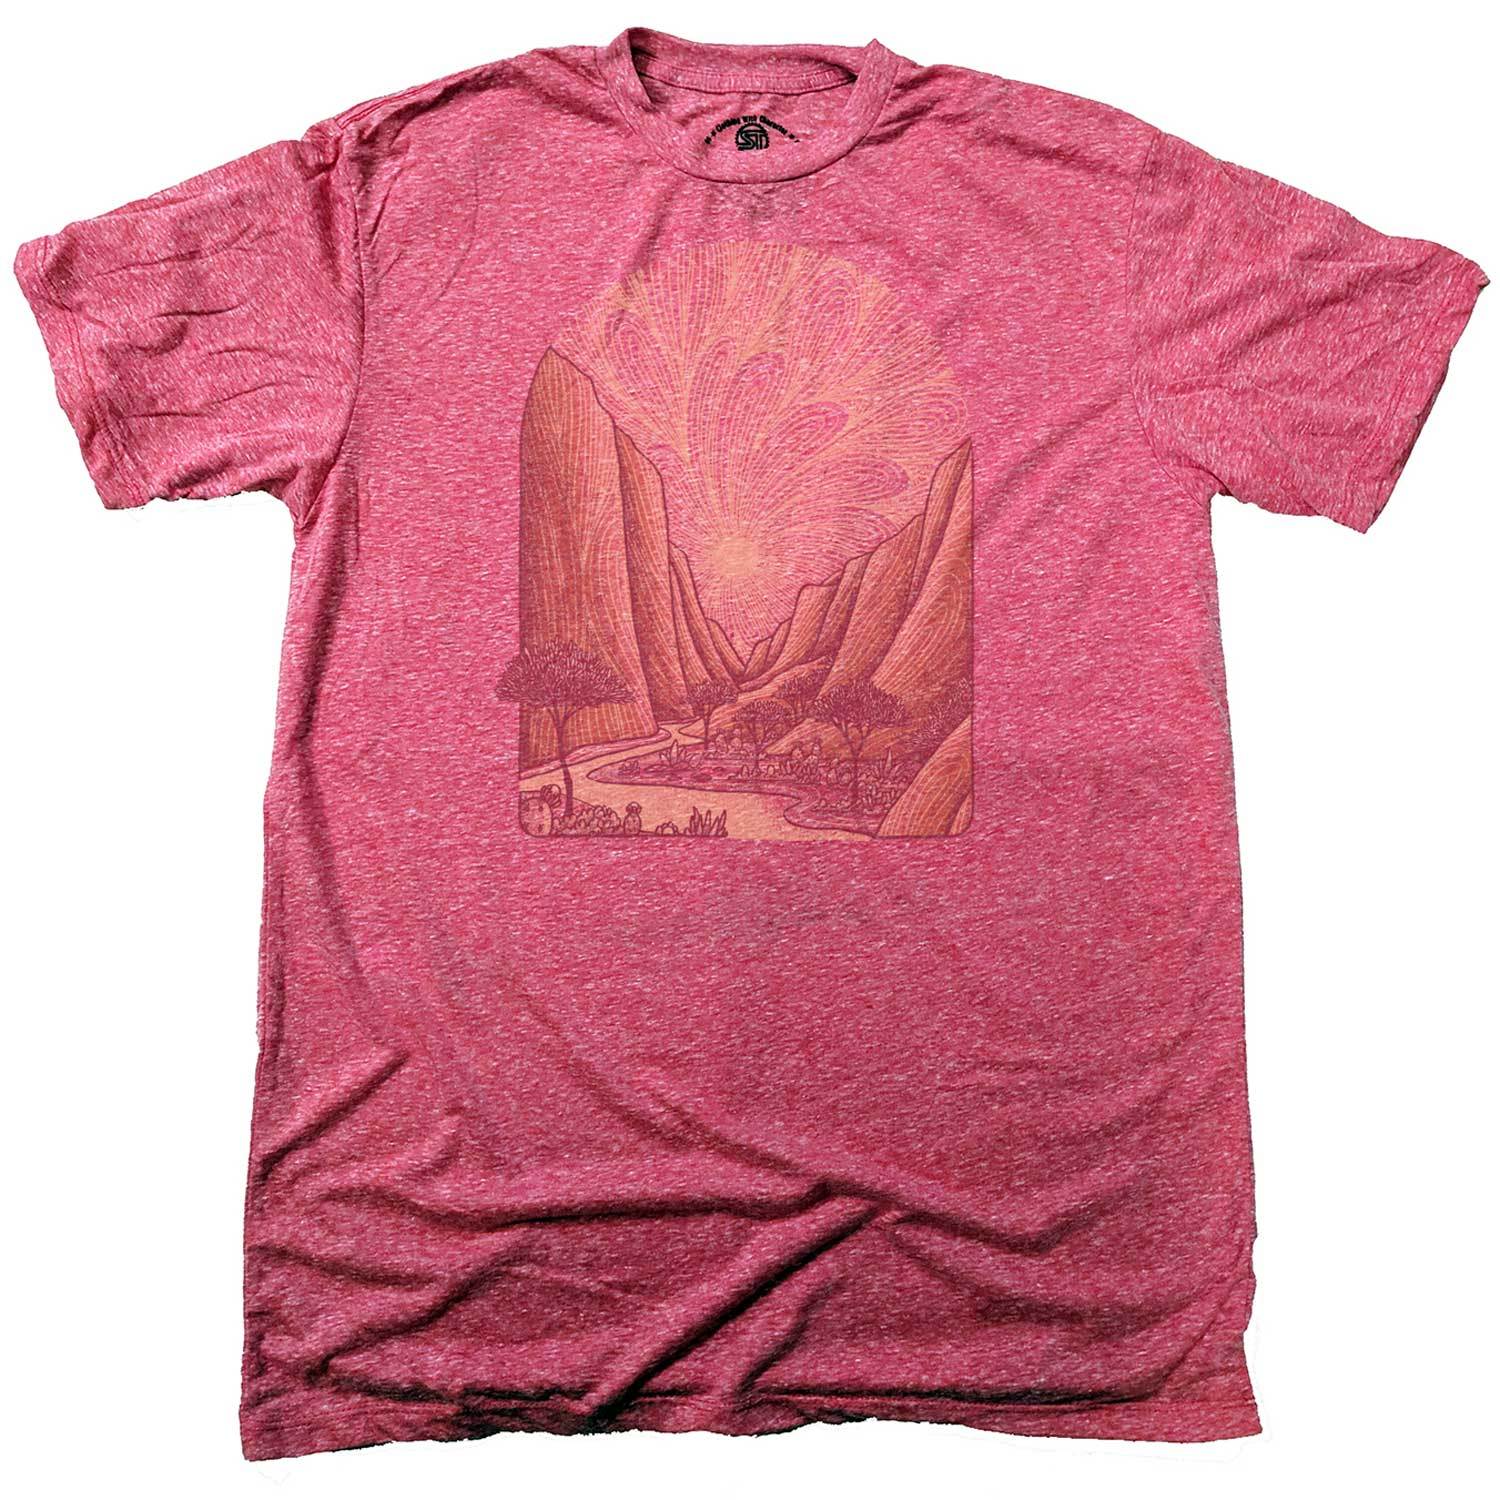 Men's Zion Canyon Vintage Artsy T-Shirt | Retro National Park Graphic Tee | Solid Threads